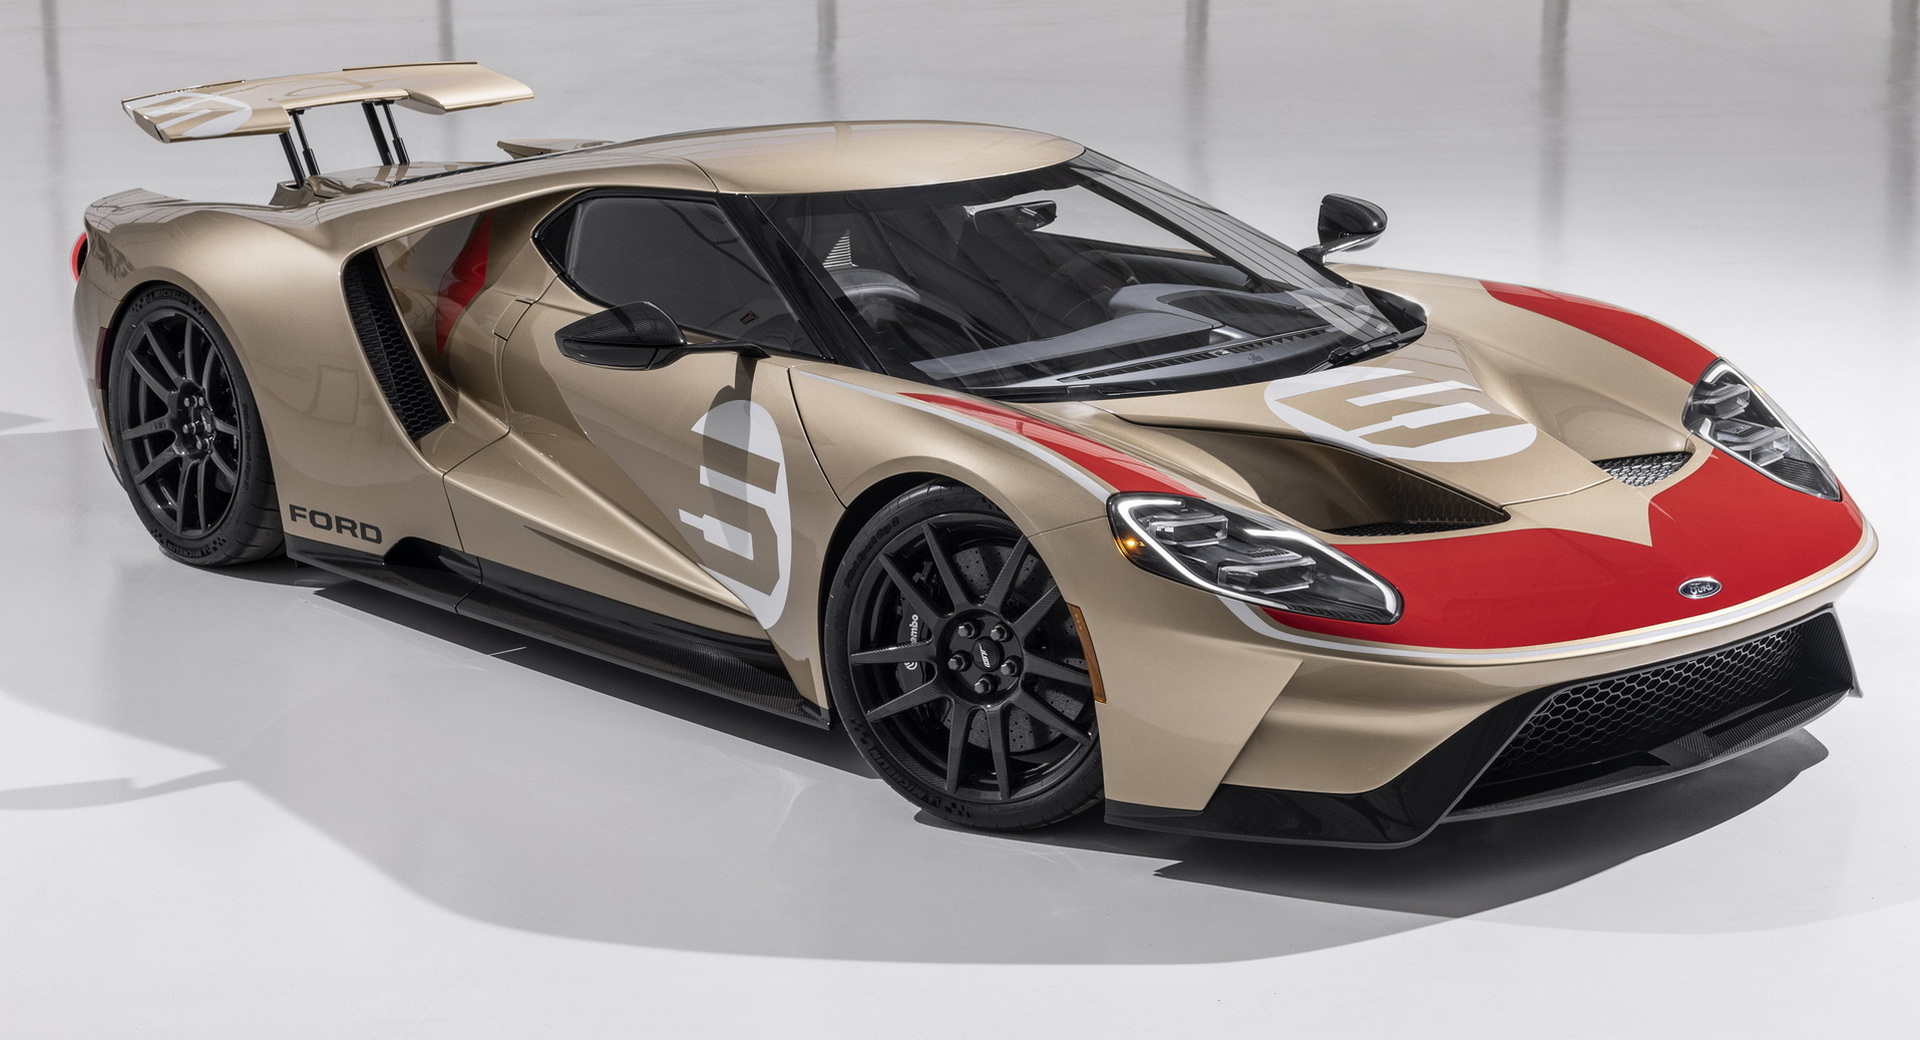 Ford-GT-Holman-Moody-Heritage-Edition-1